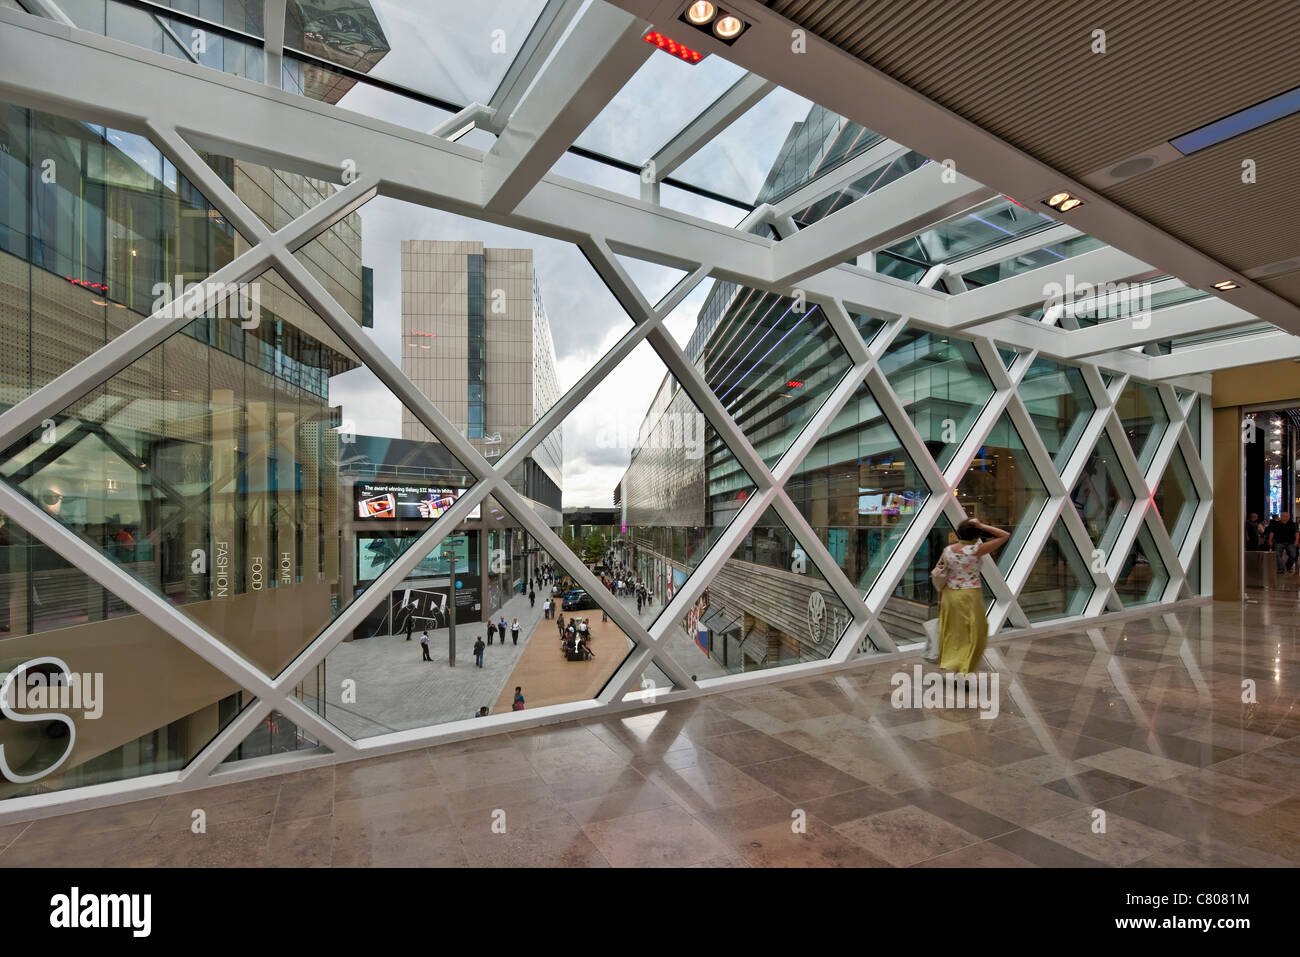 Westfield Shopping Centre - Stratford. Stock Photo